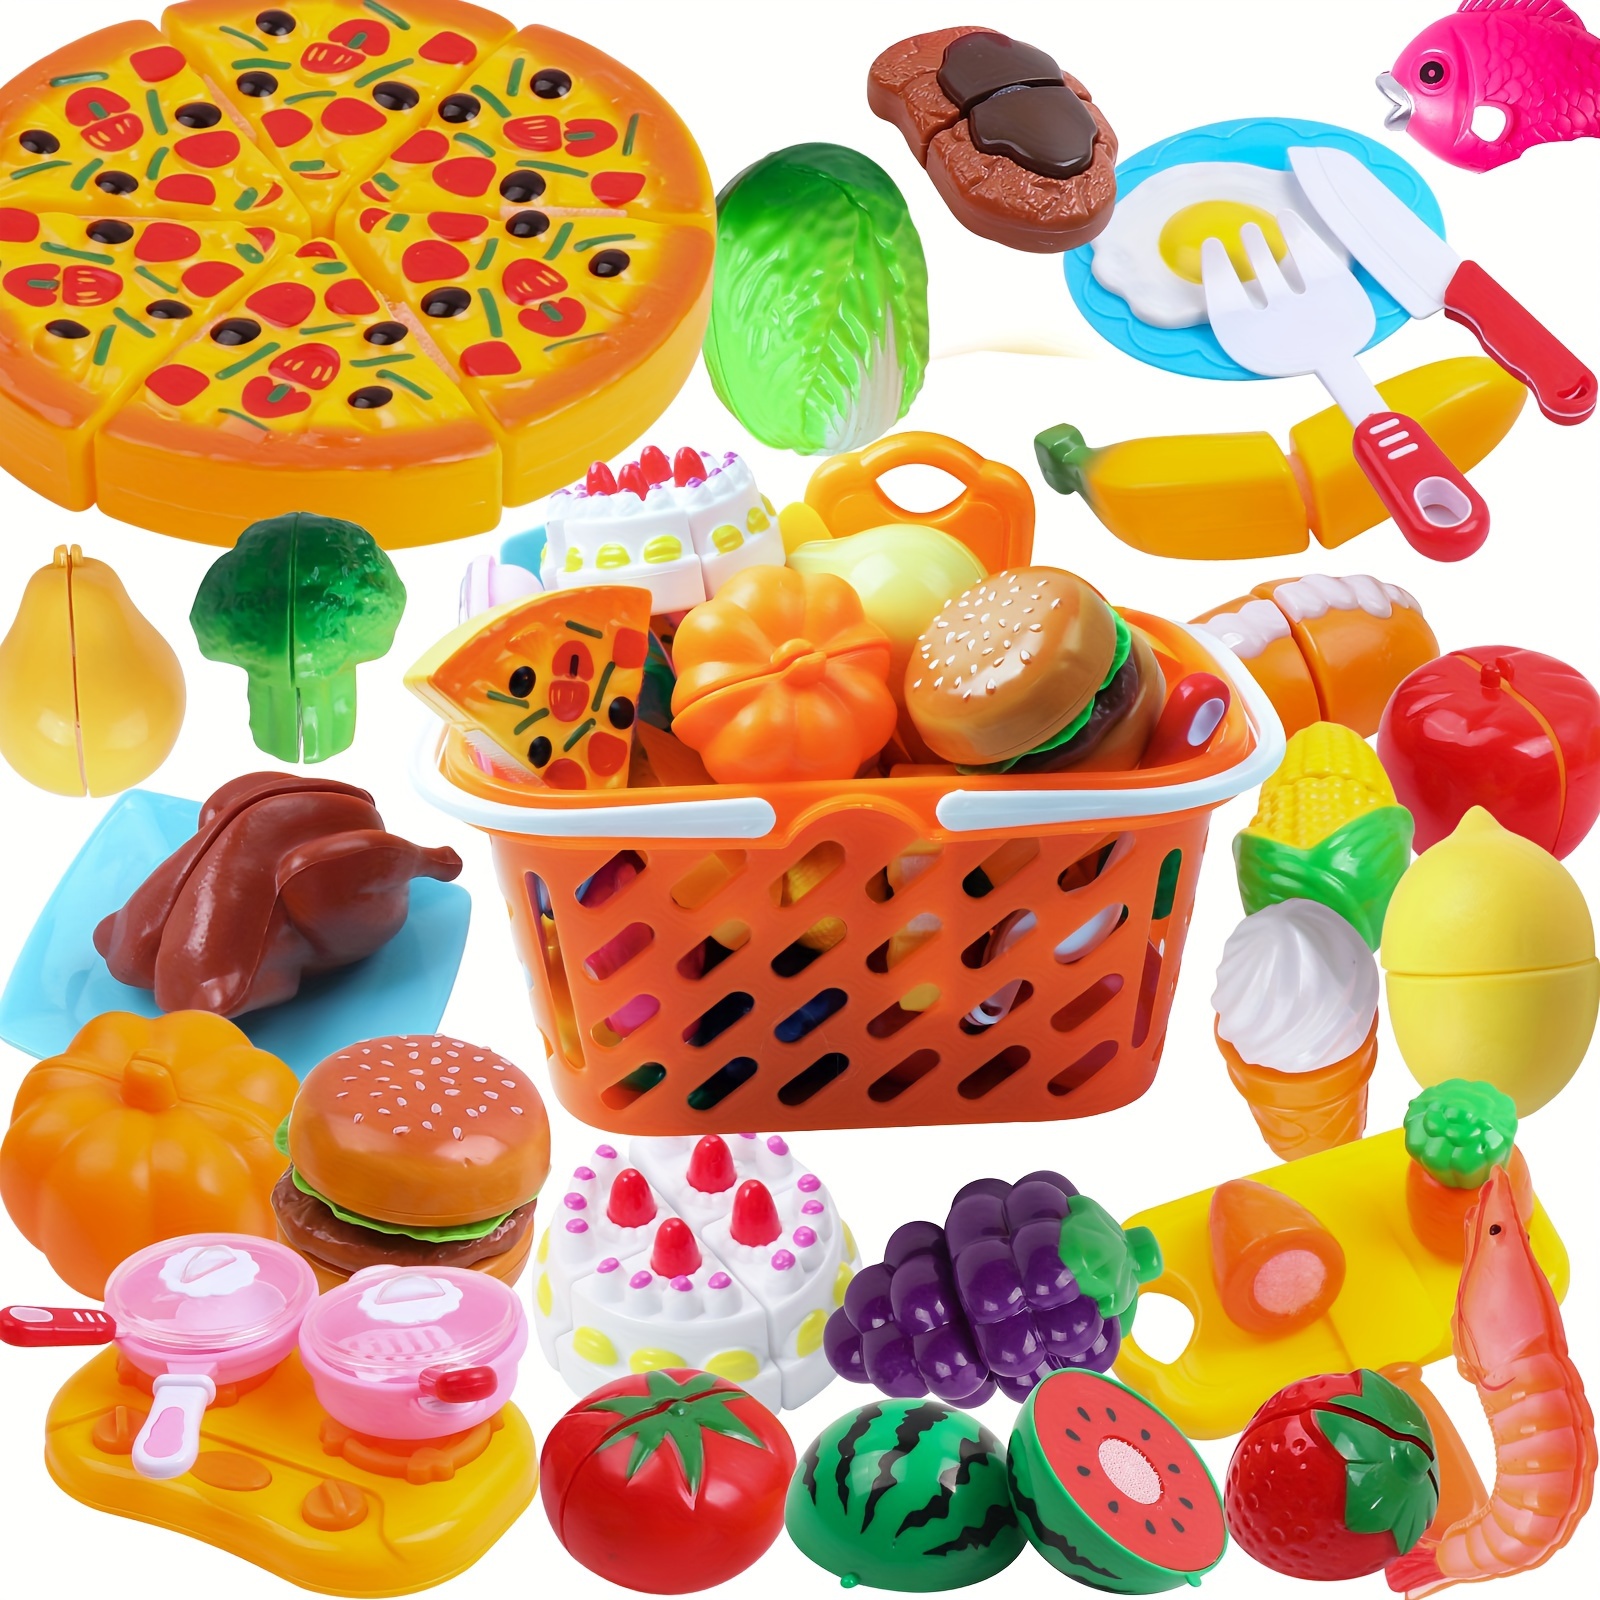 

66pcs Children Pretend Play Toy Set With Basket Containing Many Fruits, Food, Cutlery, Knives, Plates And Other Kitchen Scene Playsets, Suitable For Children Over 3 Years Old